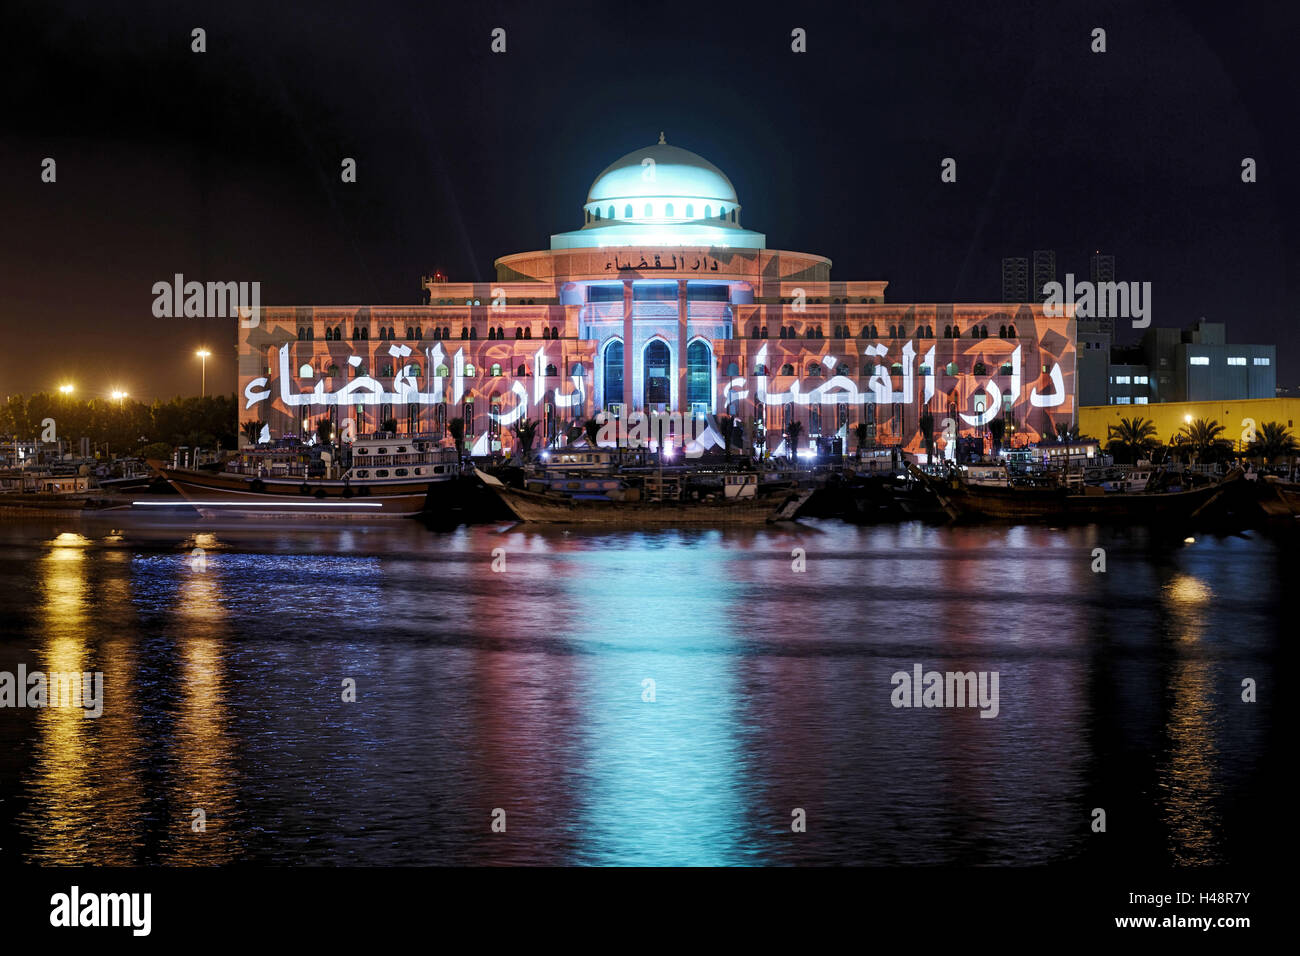 coloured Illumination, projection, Sharjah Light festival, central law courts, Courthouse, emirate Sharjah, United Arab Emirates, Arabian peninsula, the Middle East, Asia, Stock Photo